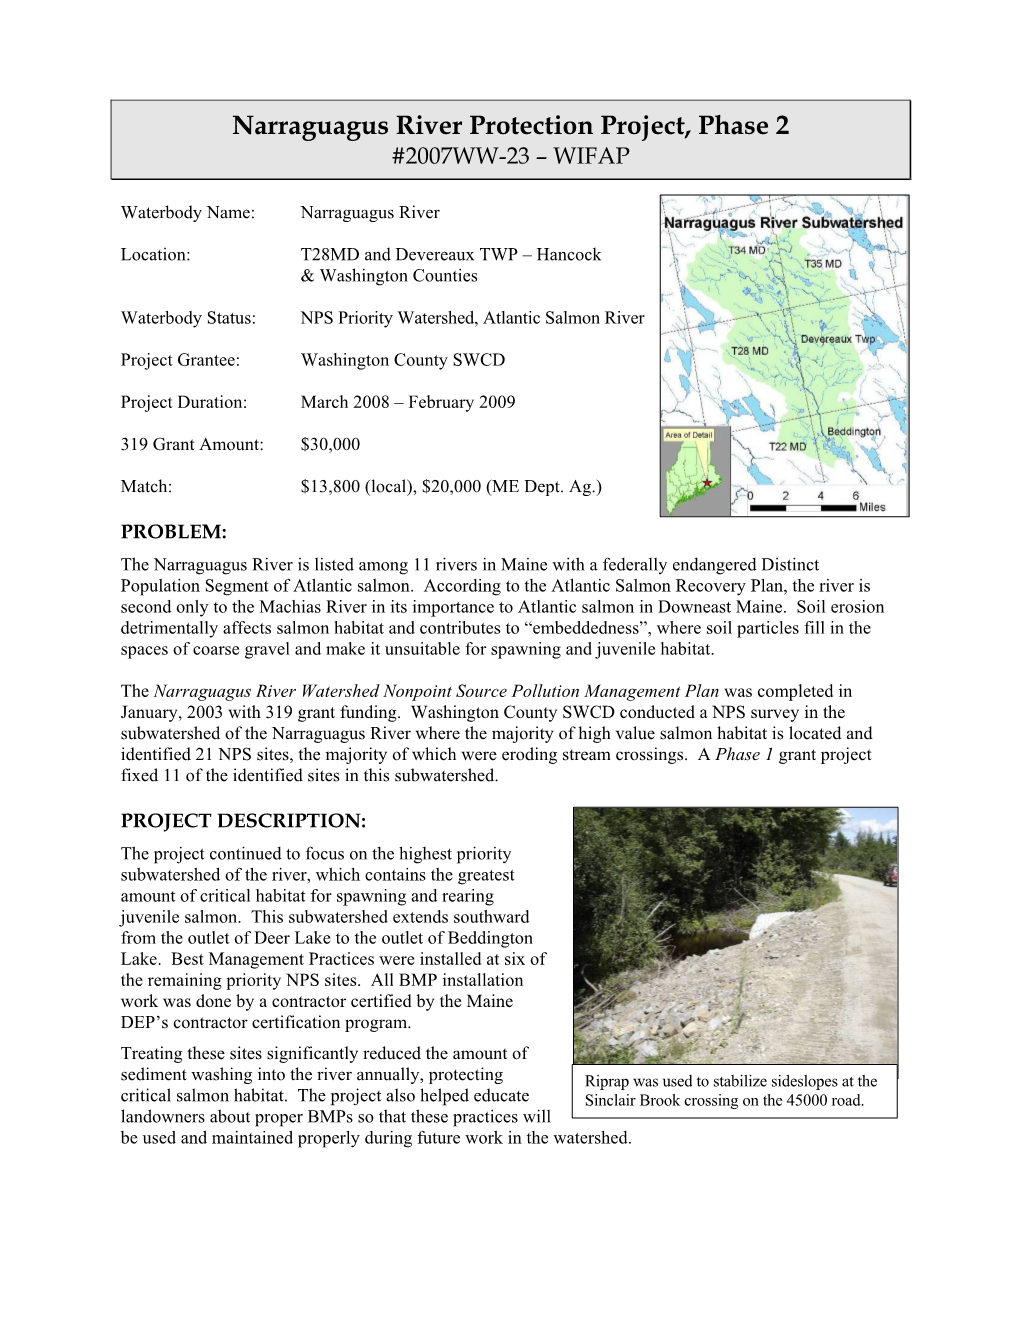 Narraguagus River Protection Project, Phase 2 #2007WW-23 – WIFAP